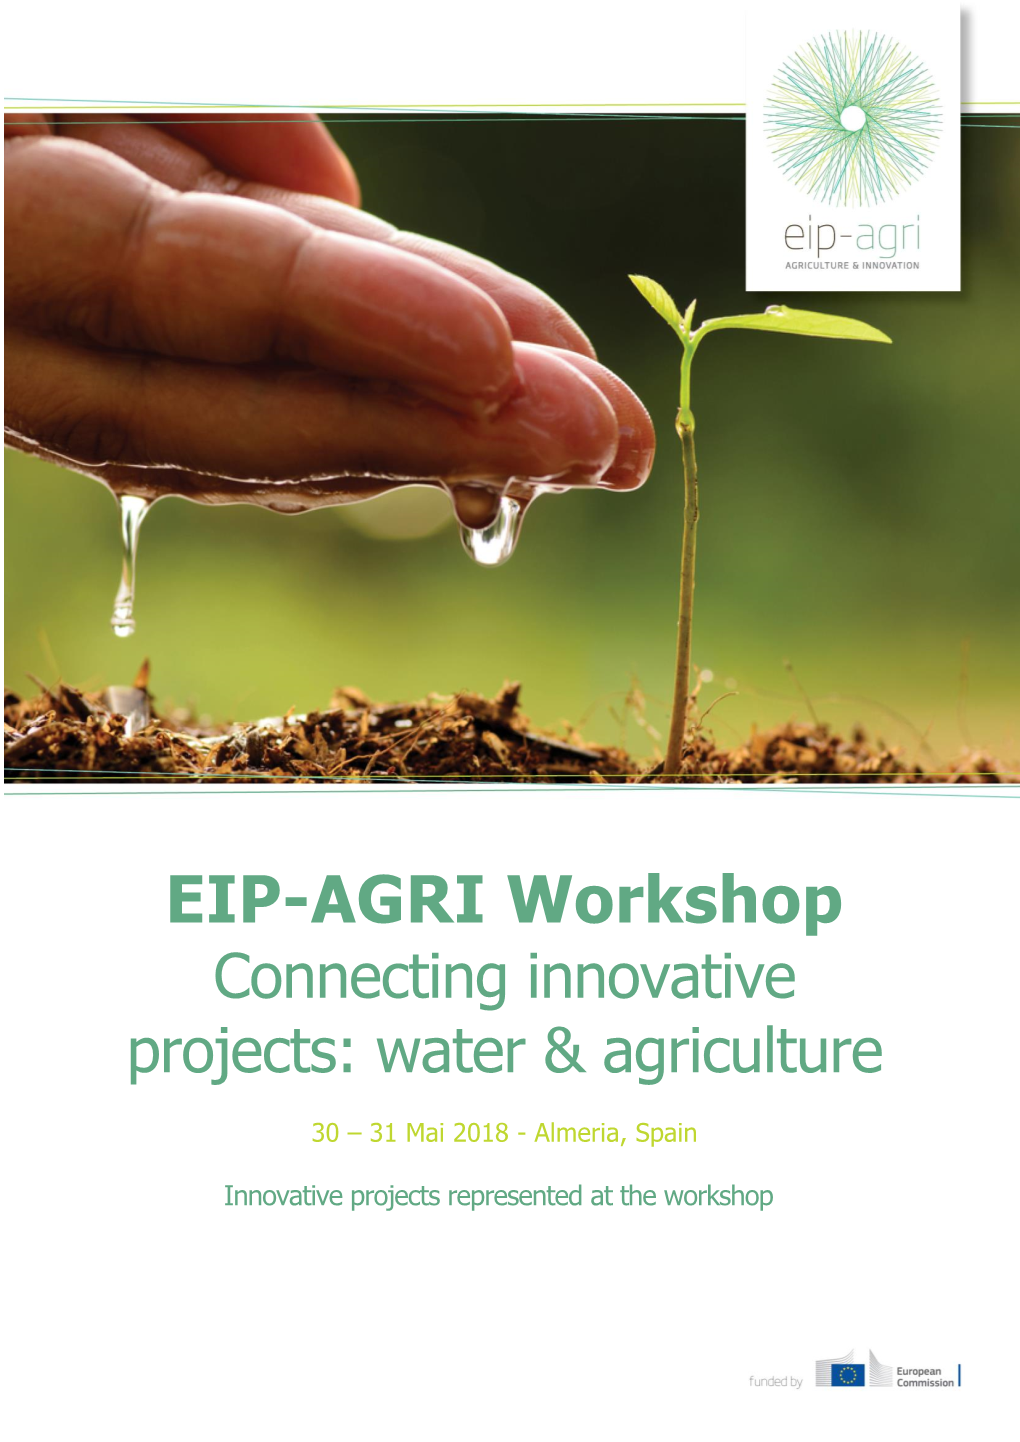 EIP-AGRI Workshop Connecting Innovative Projects: Water & Agriculture